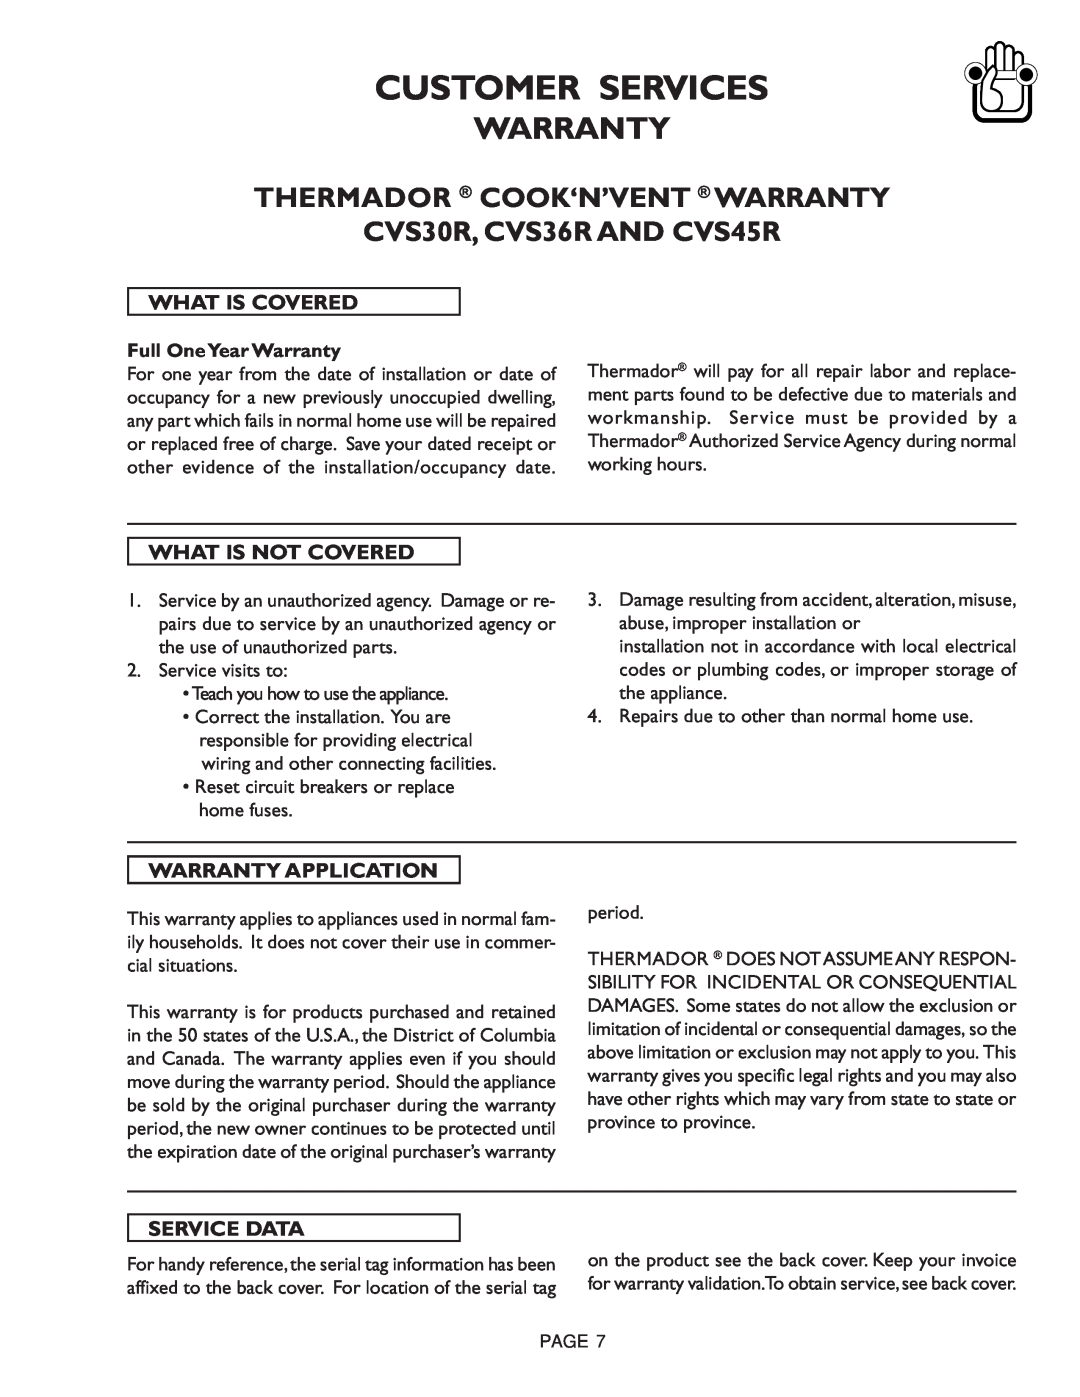 Thermador CVS30R, CVS45R Customer Services, What Is Covered, What Is Not Covered, Warranty Application, Service Data 